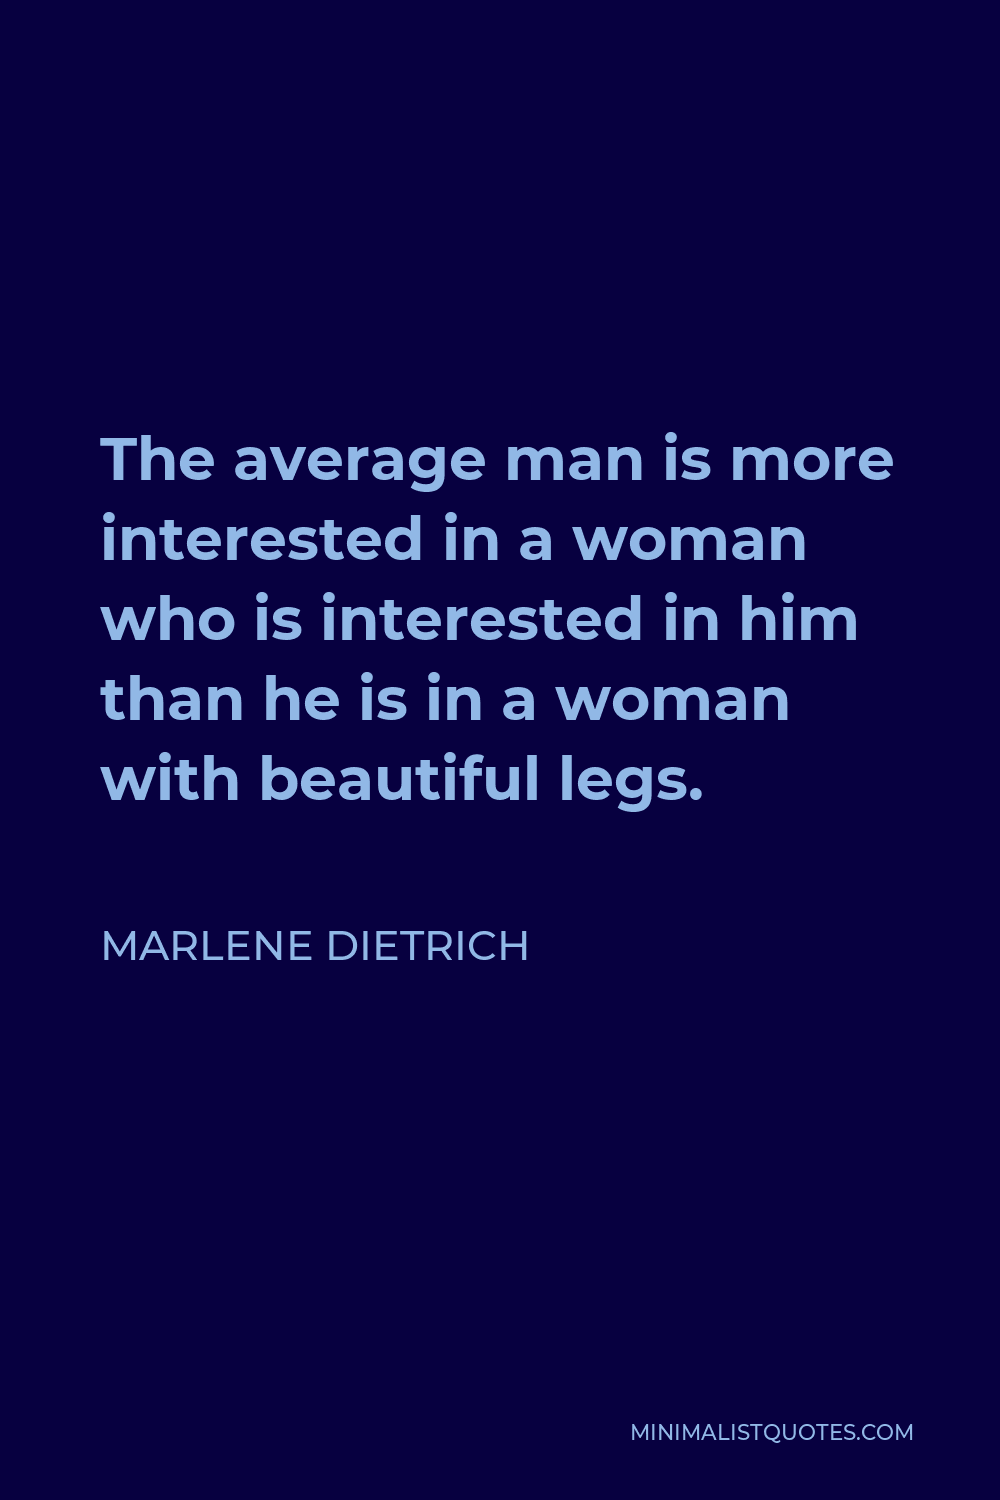 Marlene Dietrich Quote - The average man is more interested in a woman who is interested in him than he is in a woman with beautiful legs.